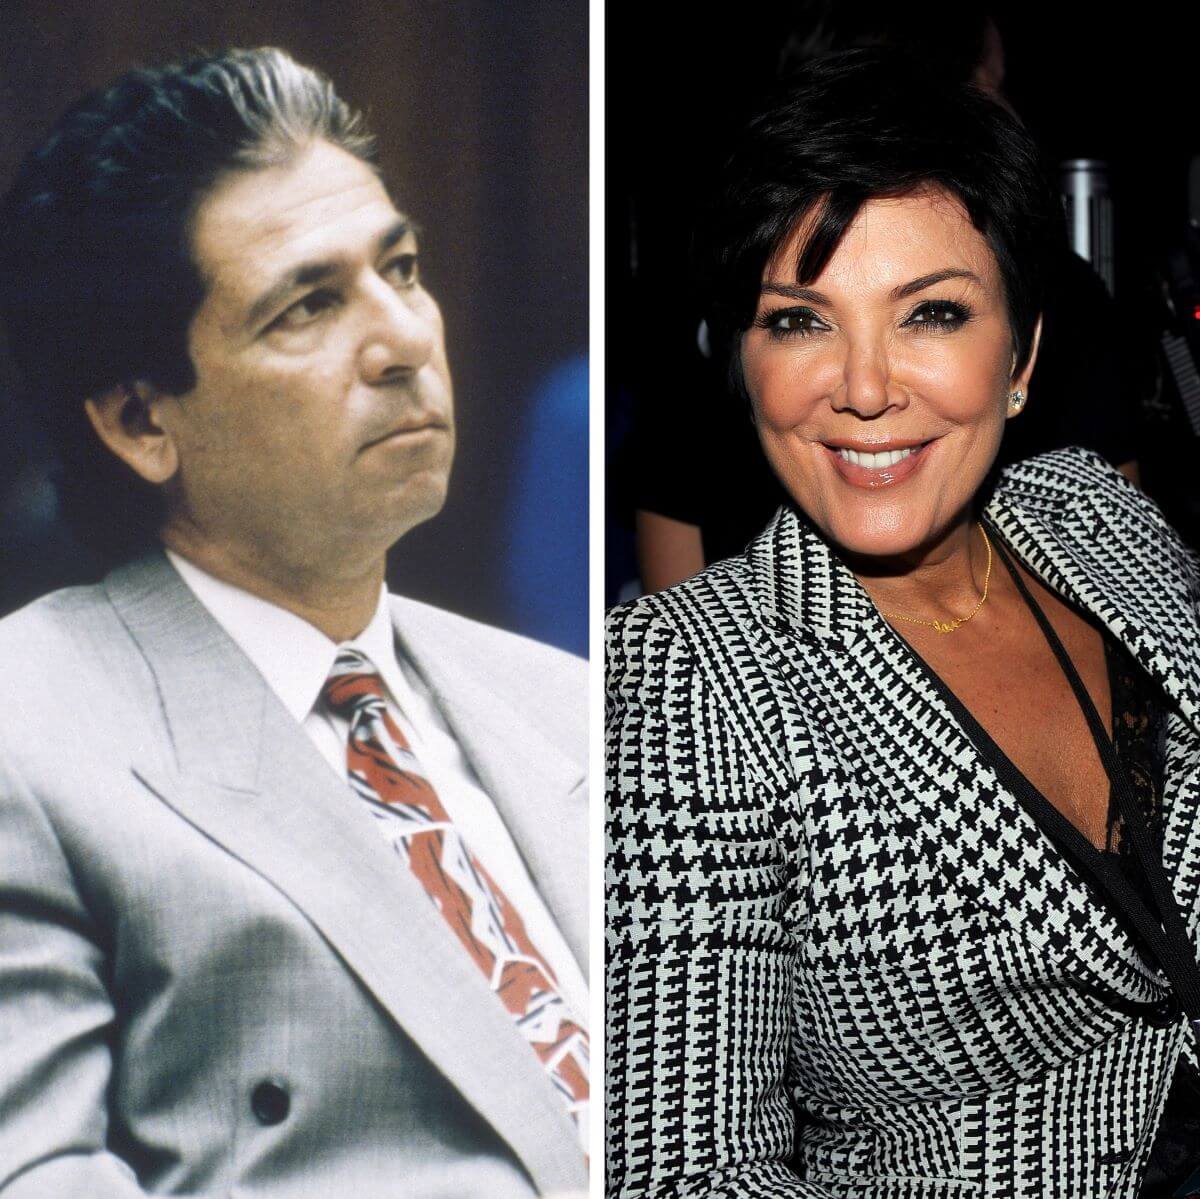 (L) Robert Karashian Sr. during the OJ Simpson murder trial in Los Angeles, (R) Kris Jenner sitting in the audience during 'The X Factor'